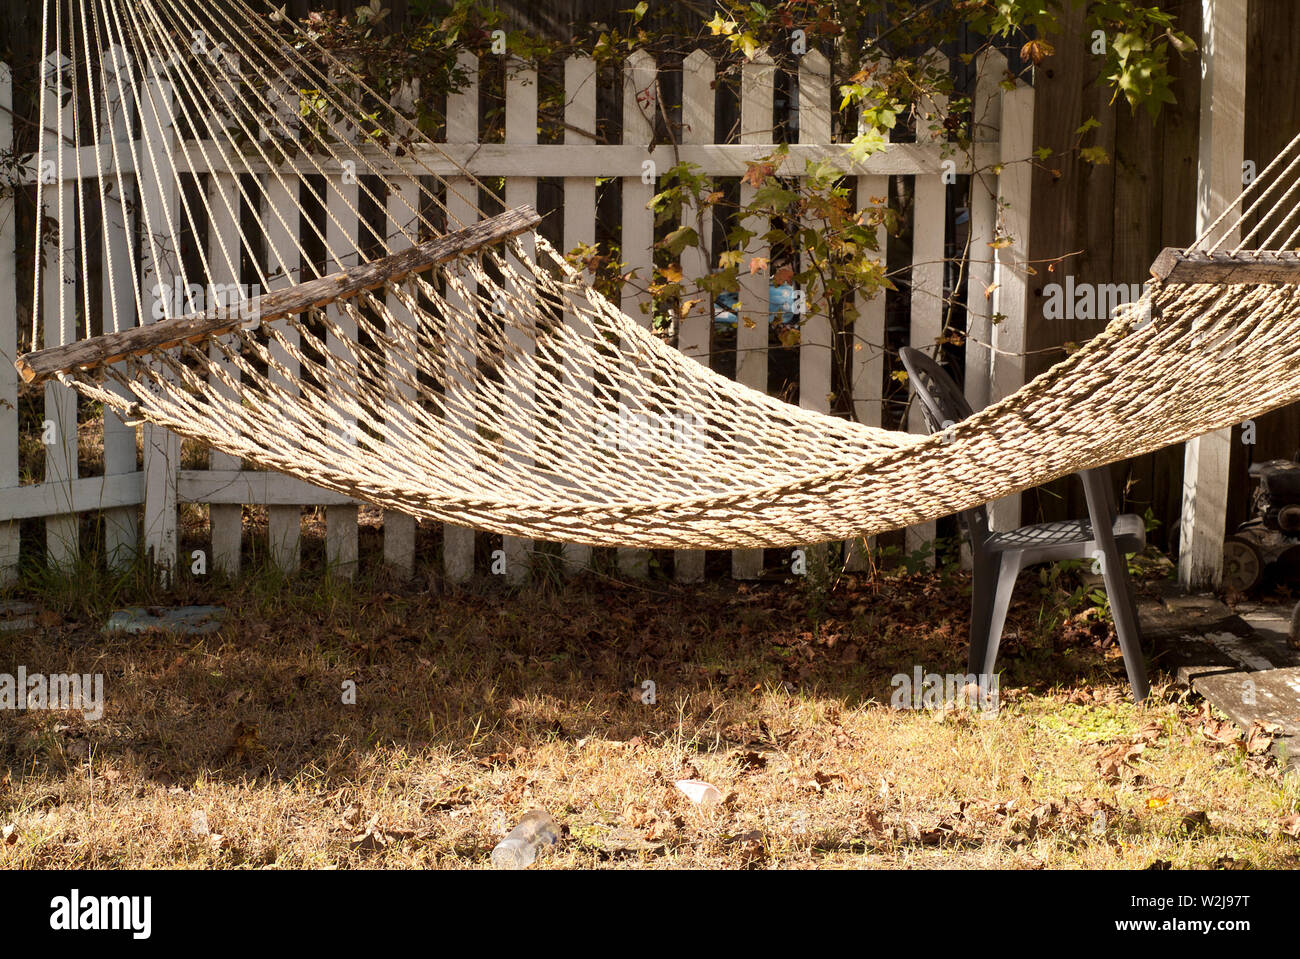 HAMMOCK TIME: A hammock hangs in the backyard of a home on a sunny fall day  Stock Photo - Alamy